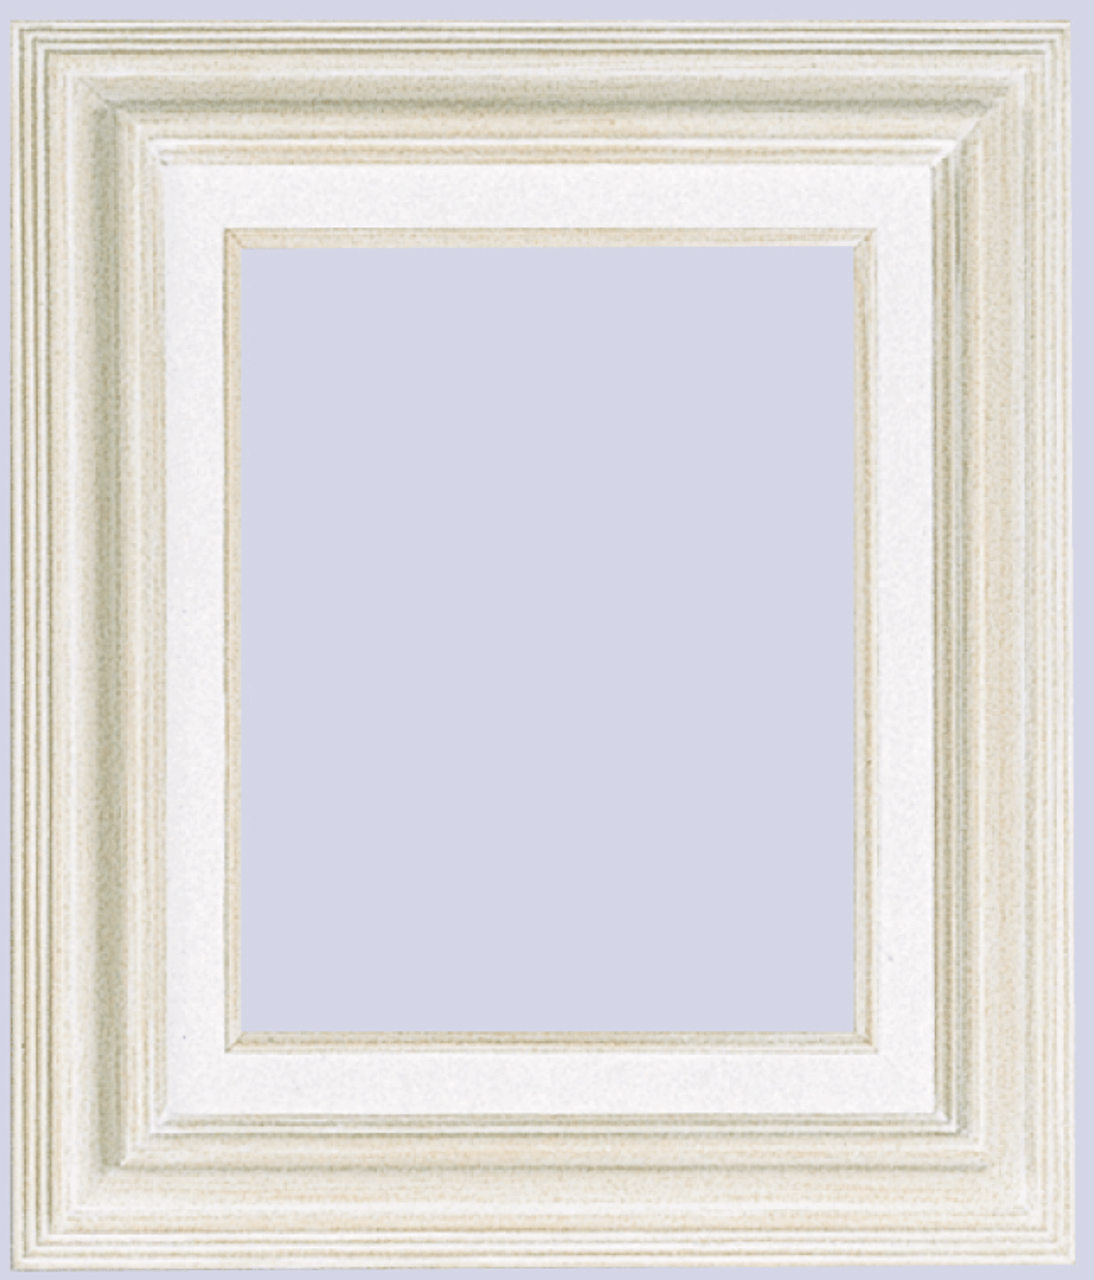  3 Inch Econo Wood Frames With Linen Liners: 12X20*